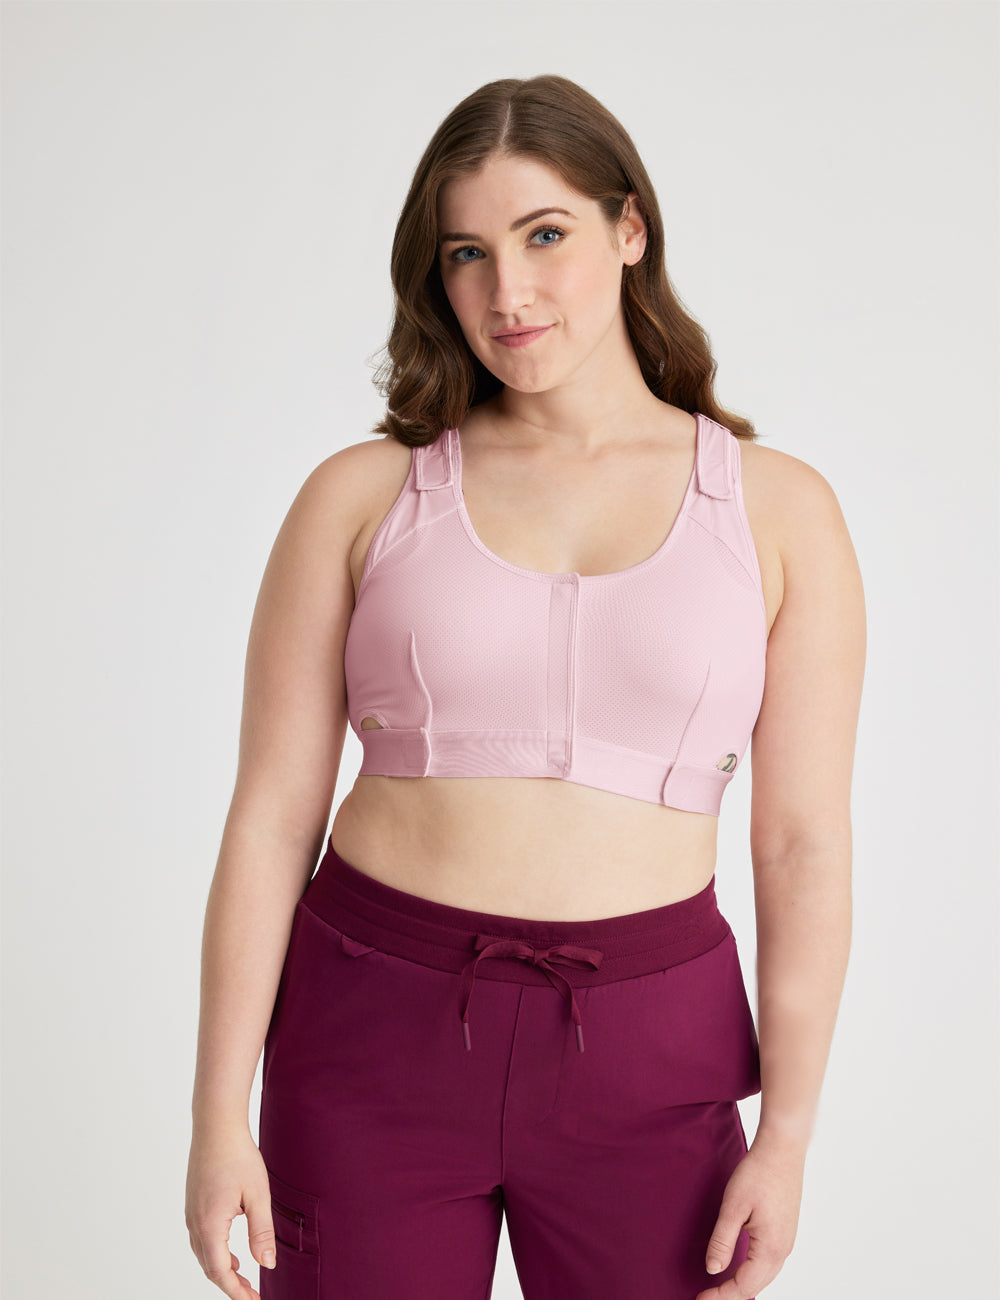 The Best Double Mastectomy Bras to Wear After Surgery - The Road